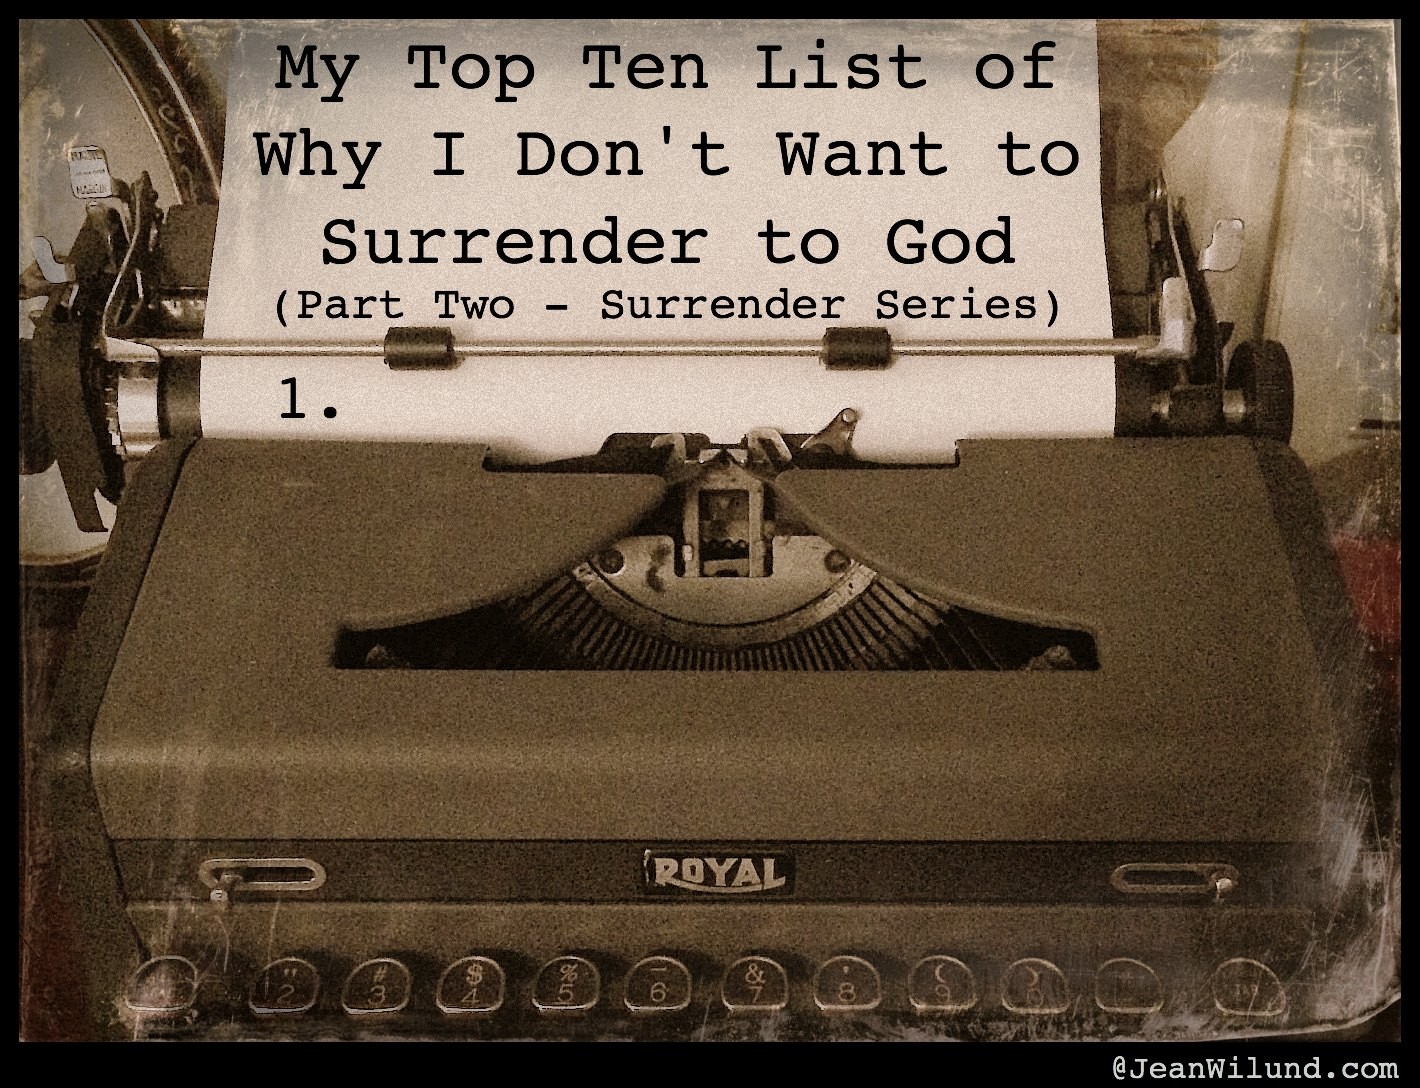 My Top Ten List of Why I Don’t Want to Surrender to God (Part Two—The Surrender Series)